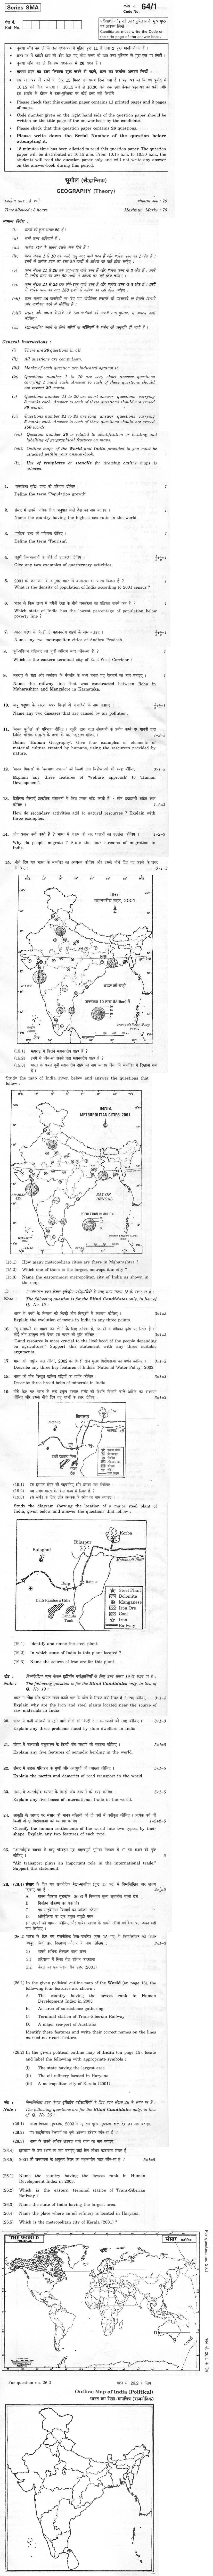 CBSE Class XII Previous Year Question Paper 2012 Geography